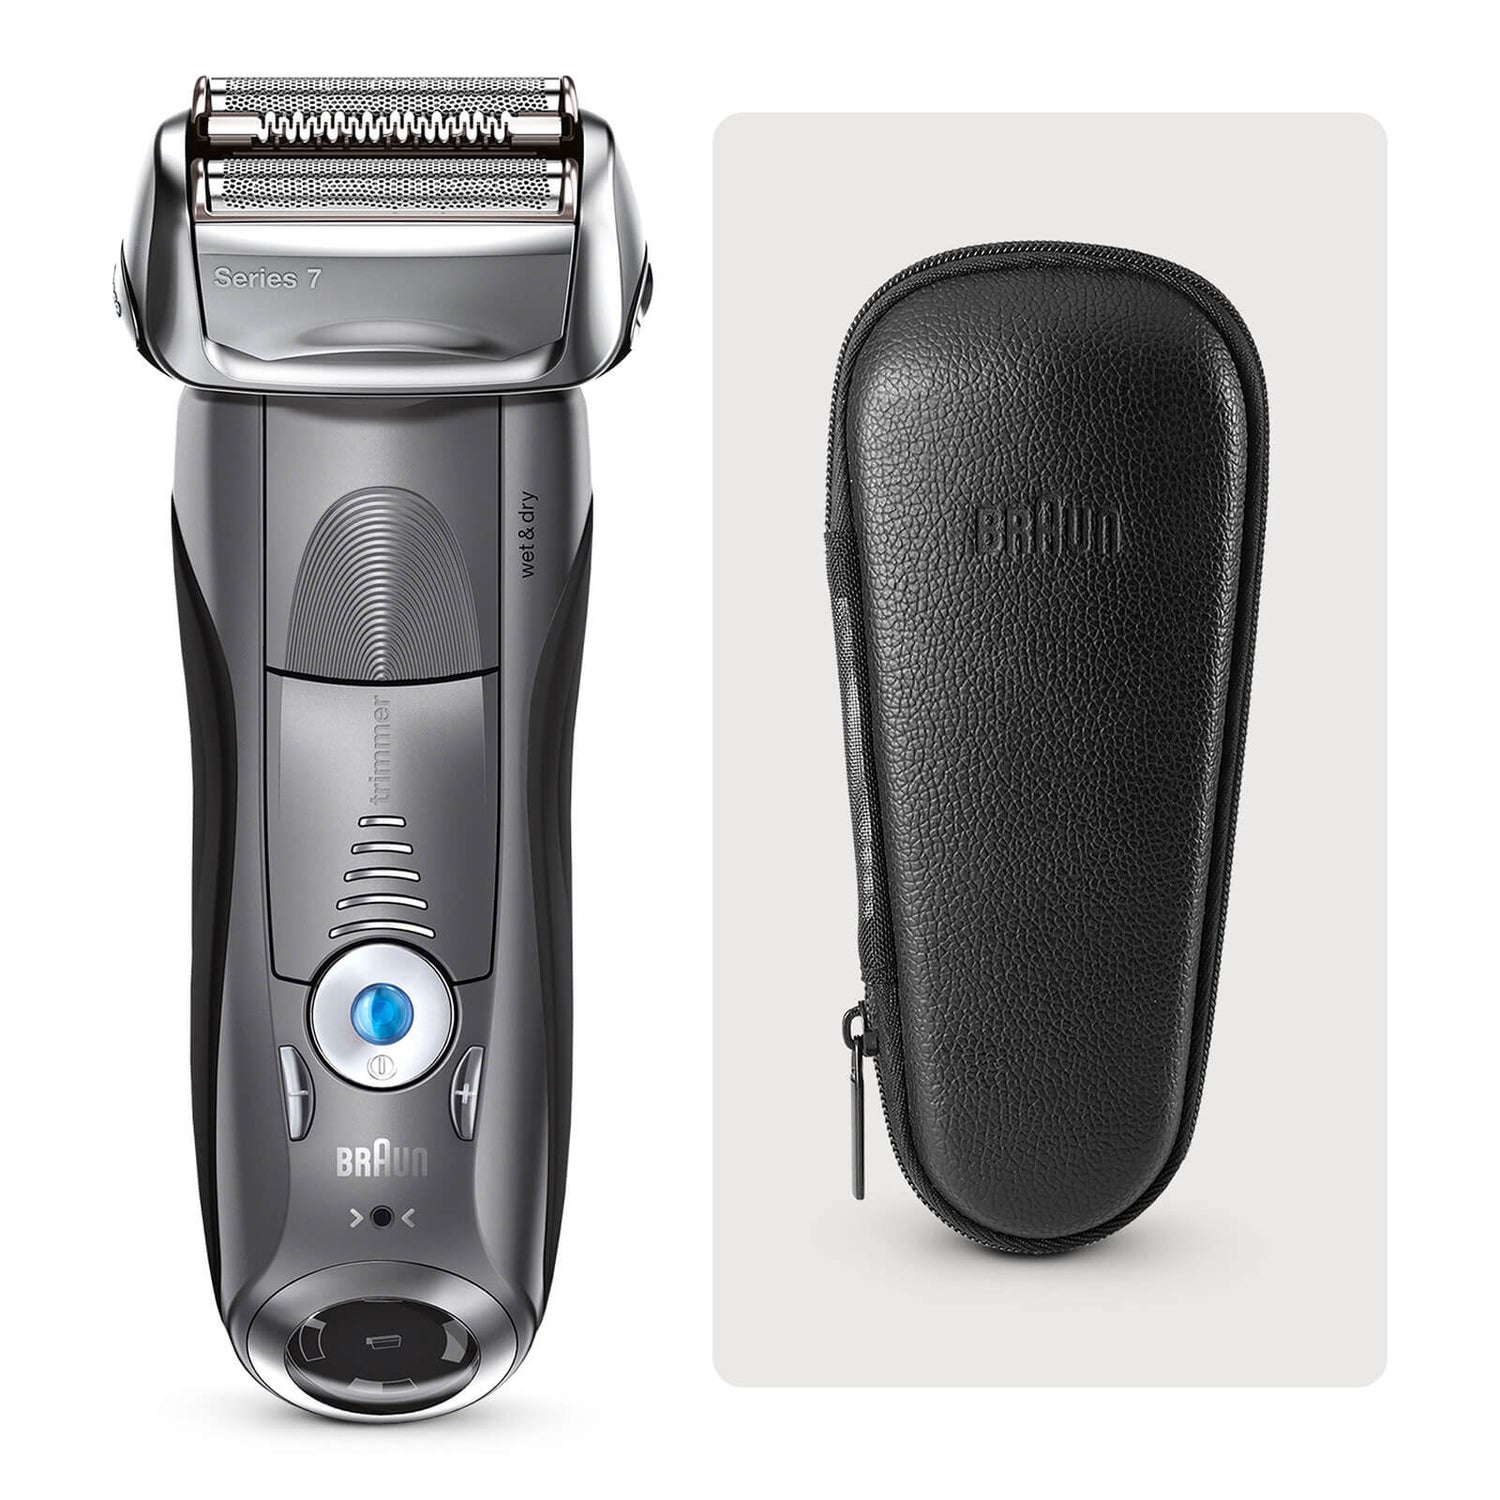 Series 7 Shaver with Precision Trimmer and Leather Case